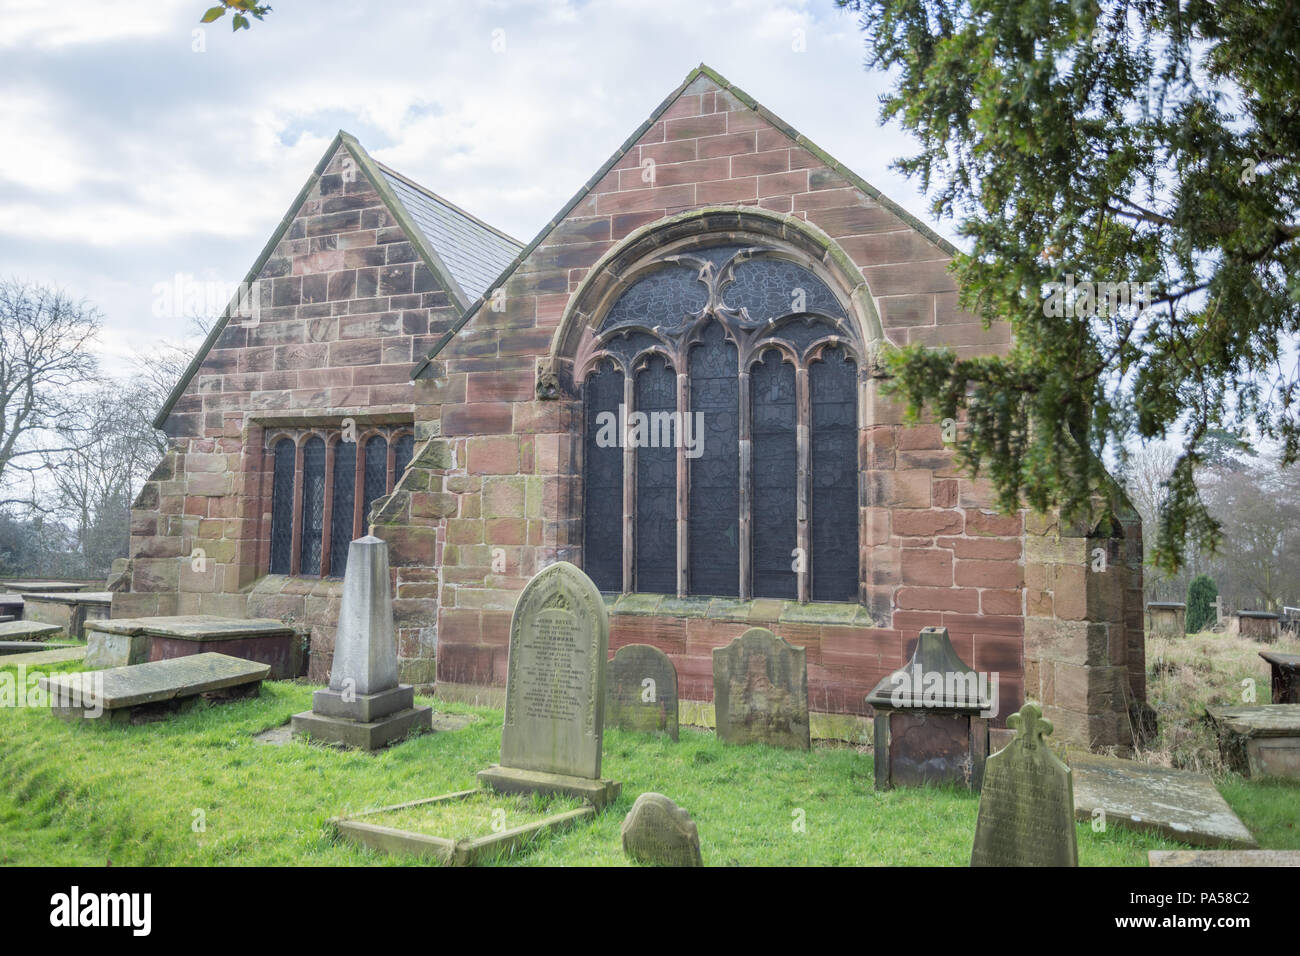 Church building with grave stones, head stones and a yew tree Stock Photo